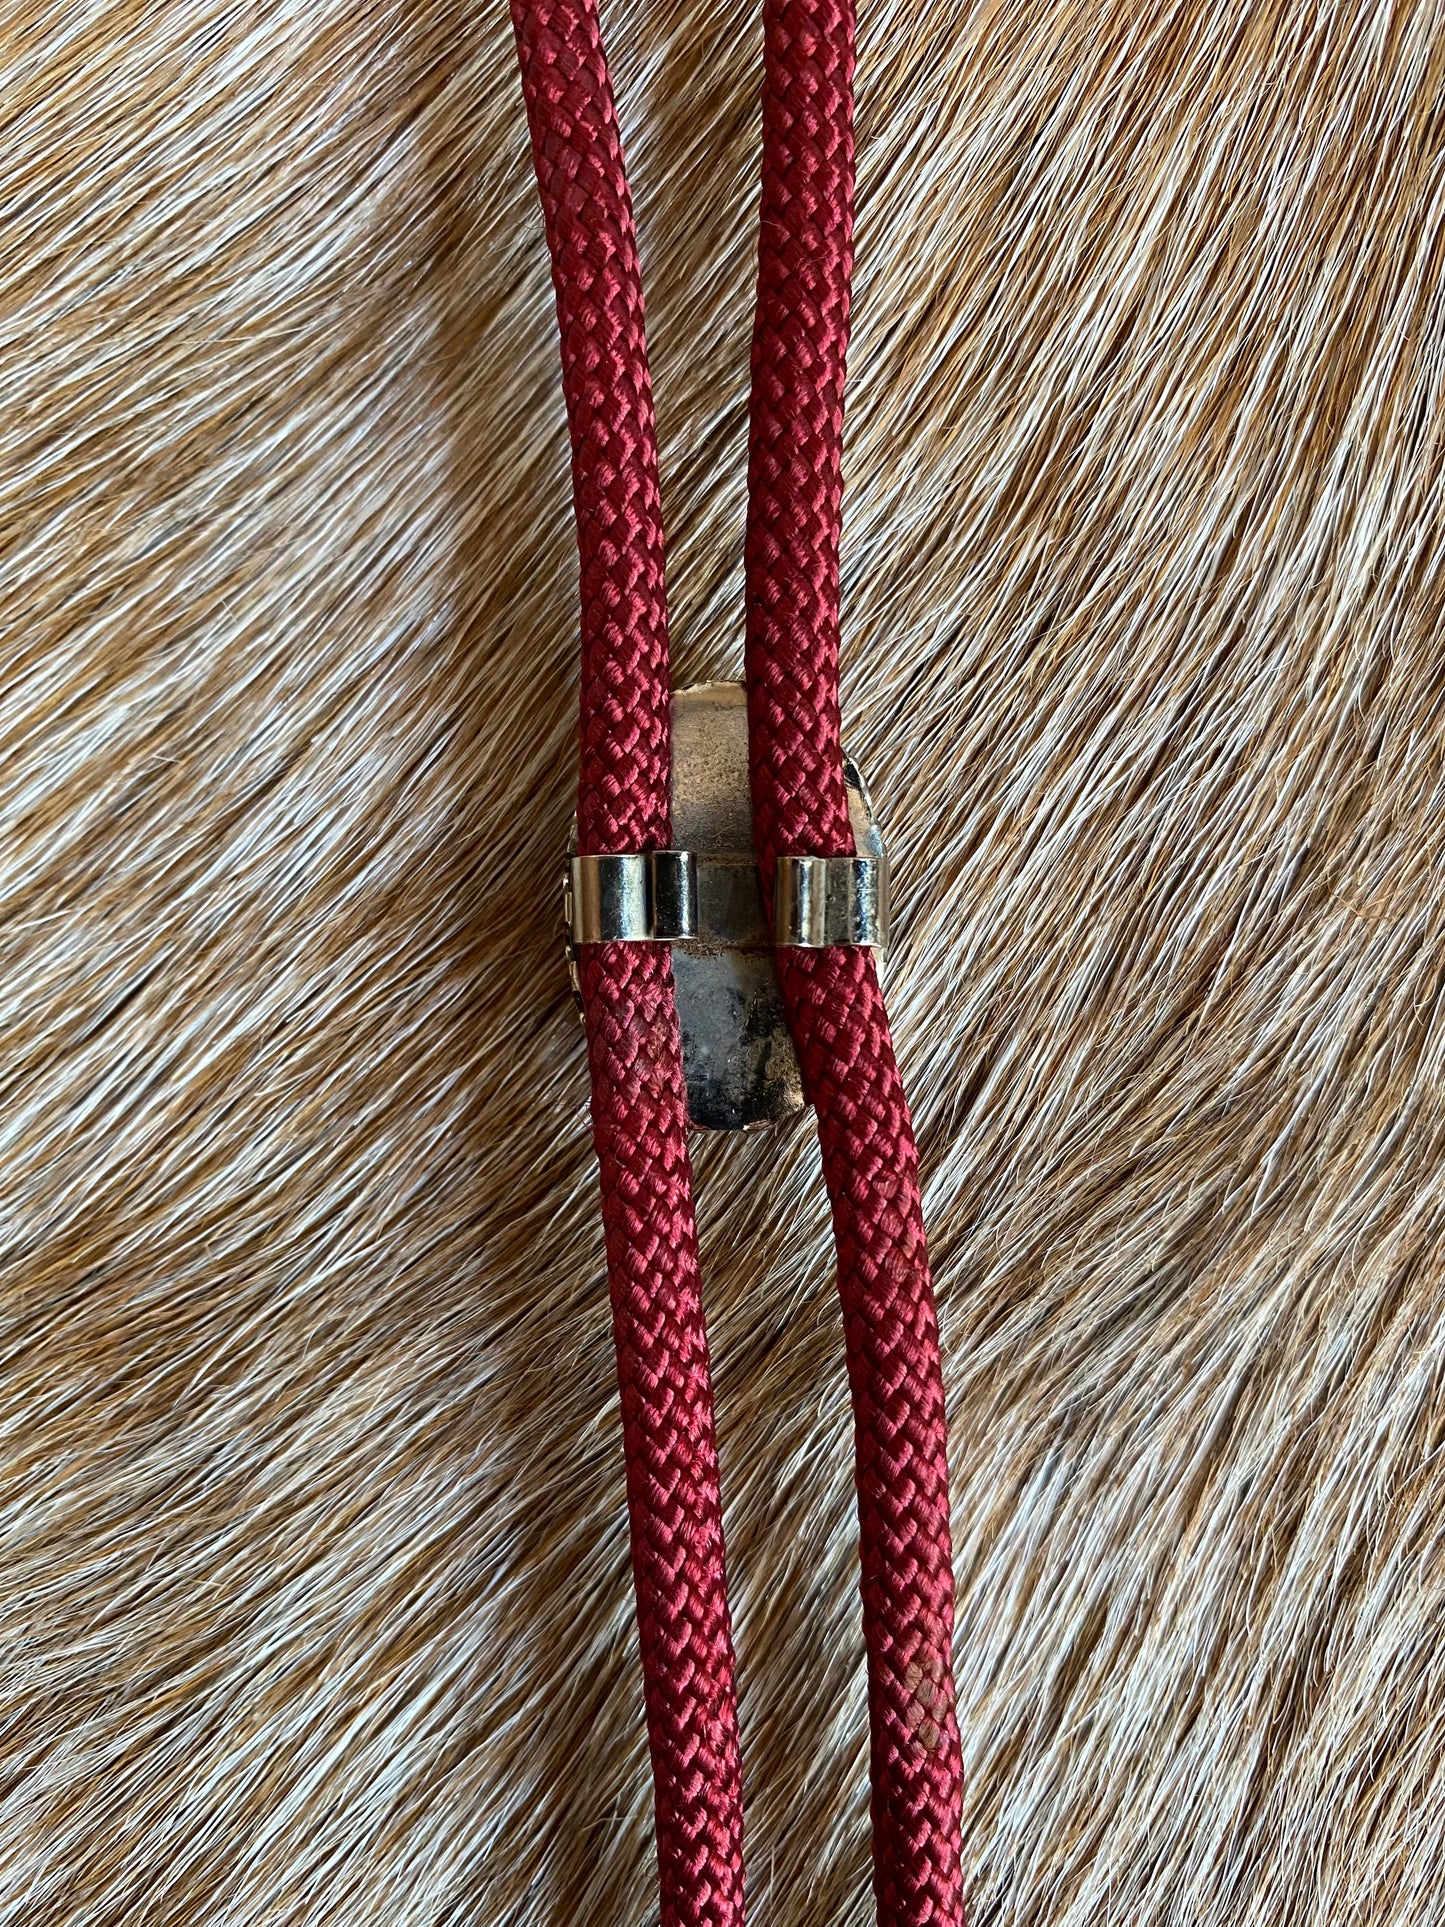 Red Mossy Agate Pendant W/ Burgundy Cord Bolo Tie